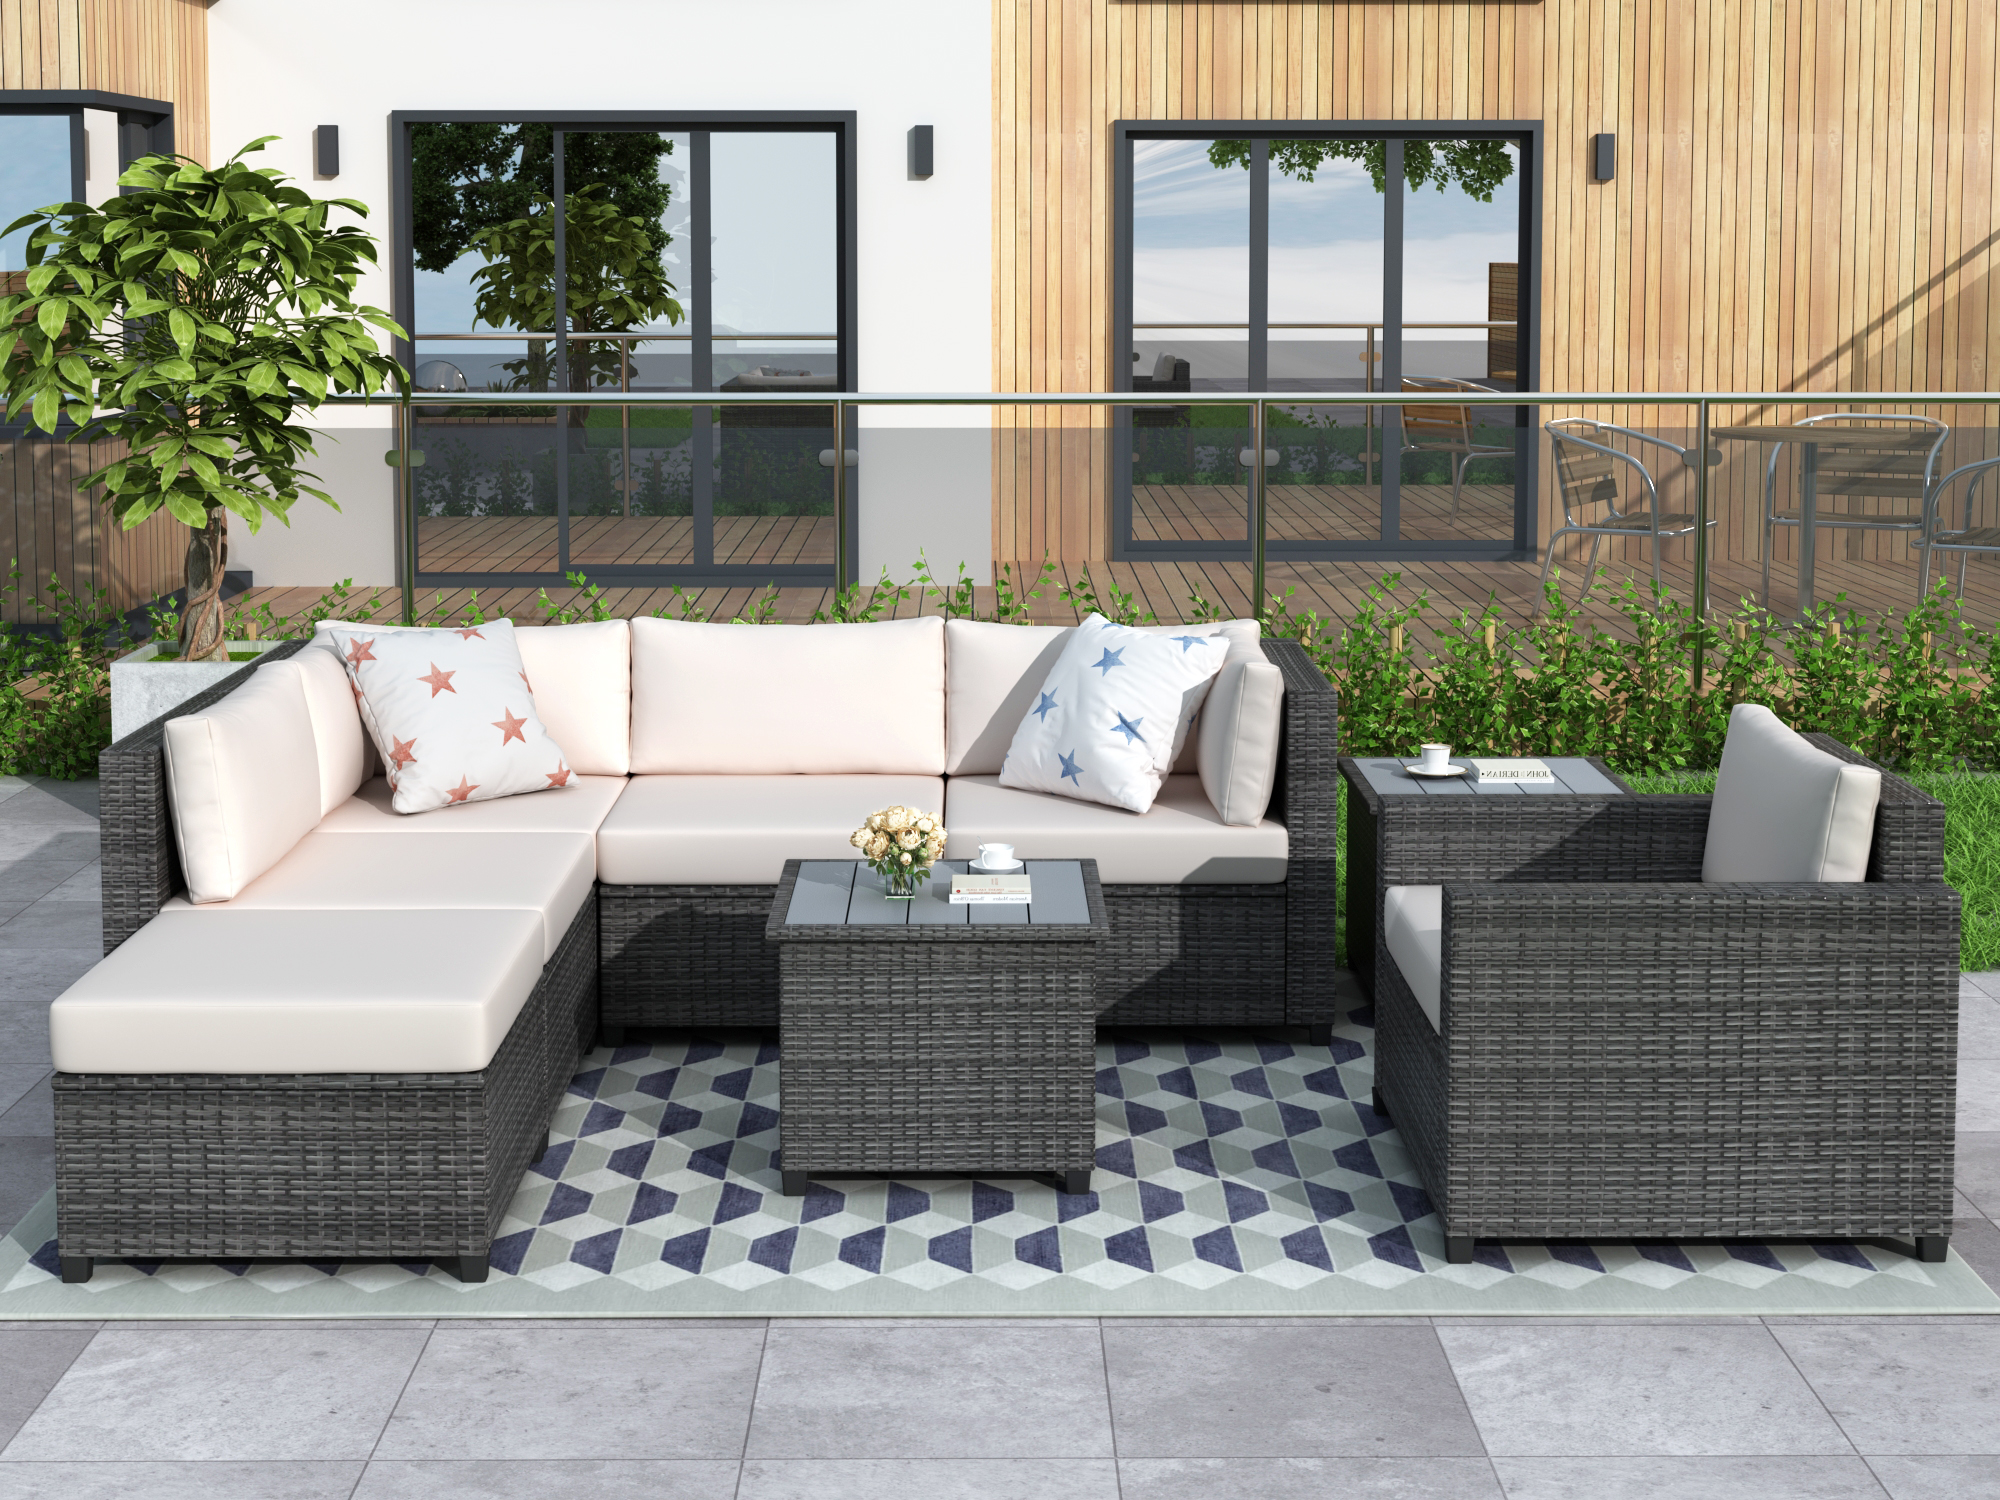 8 Piece Rattan Sectional Seating Group with Cushions, Patio Furniture Sets, Outdoor Wicker Sectional-Boyel Living